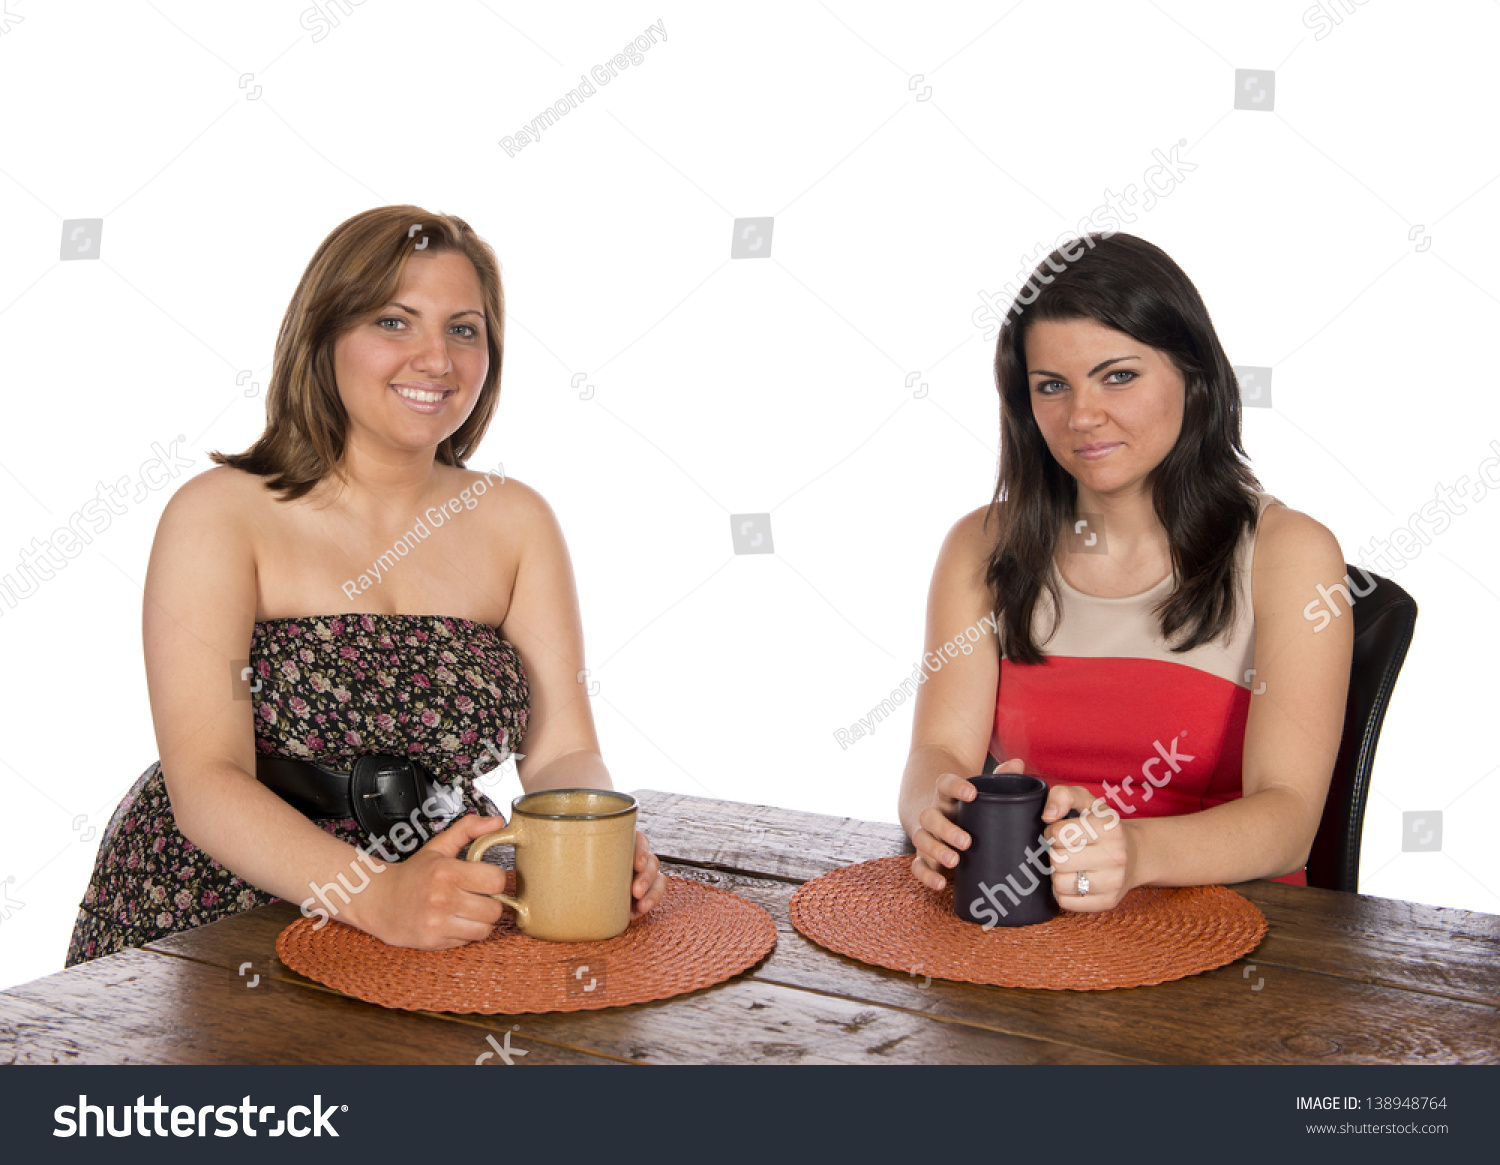 Two Happy Women Sitting At A Table Each With A Cup Of Coffee Or Coco Casual Formal Dressed In 